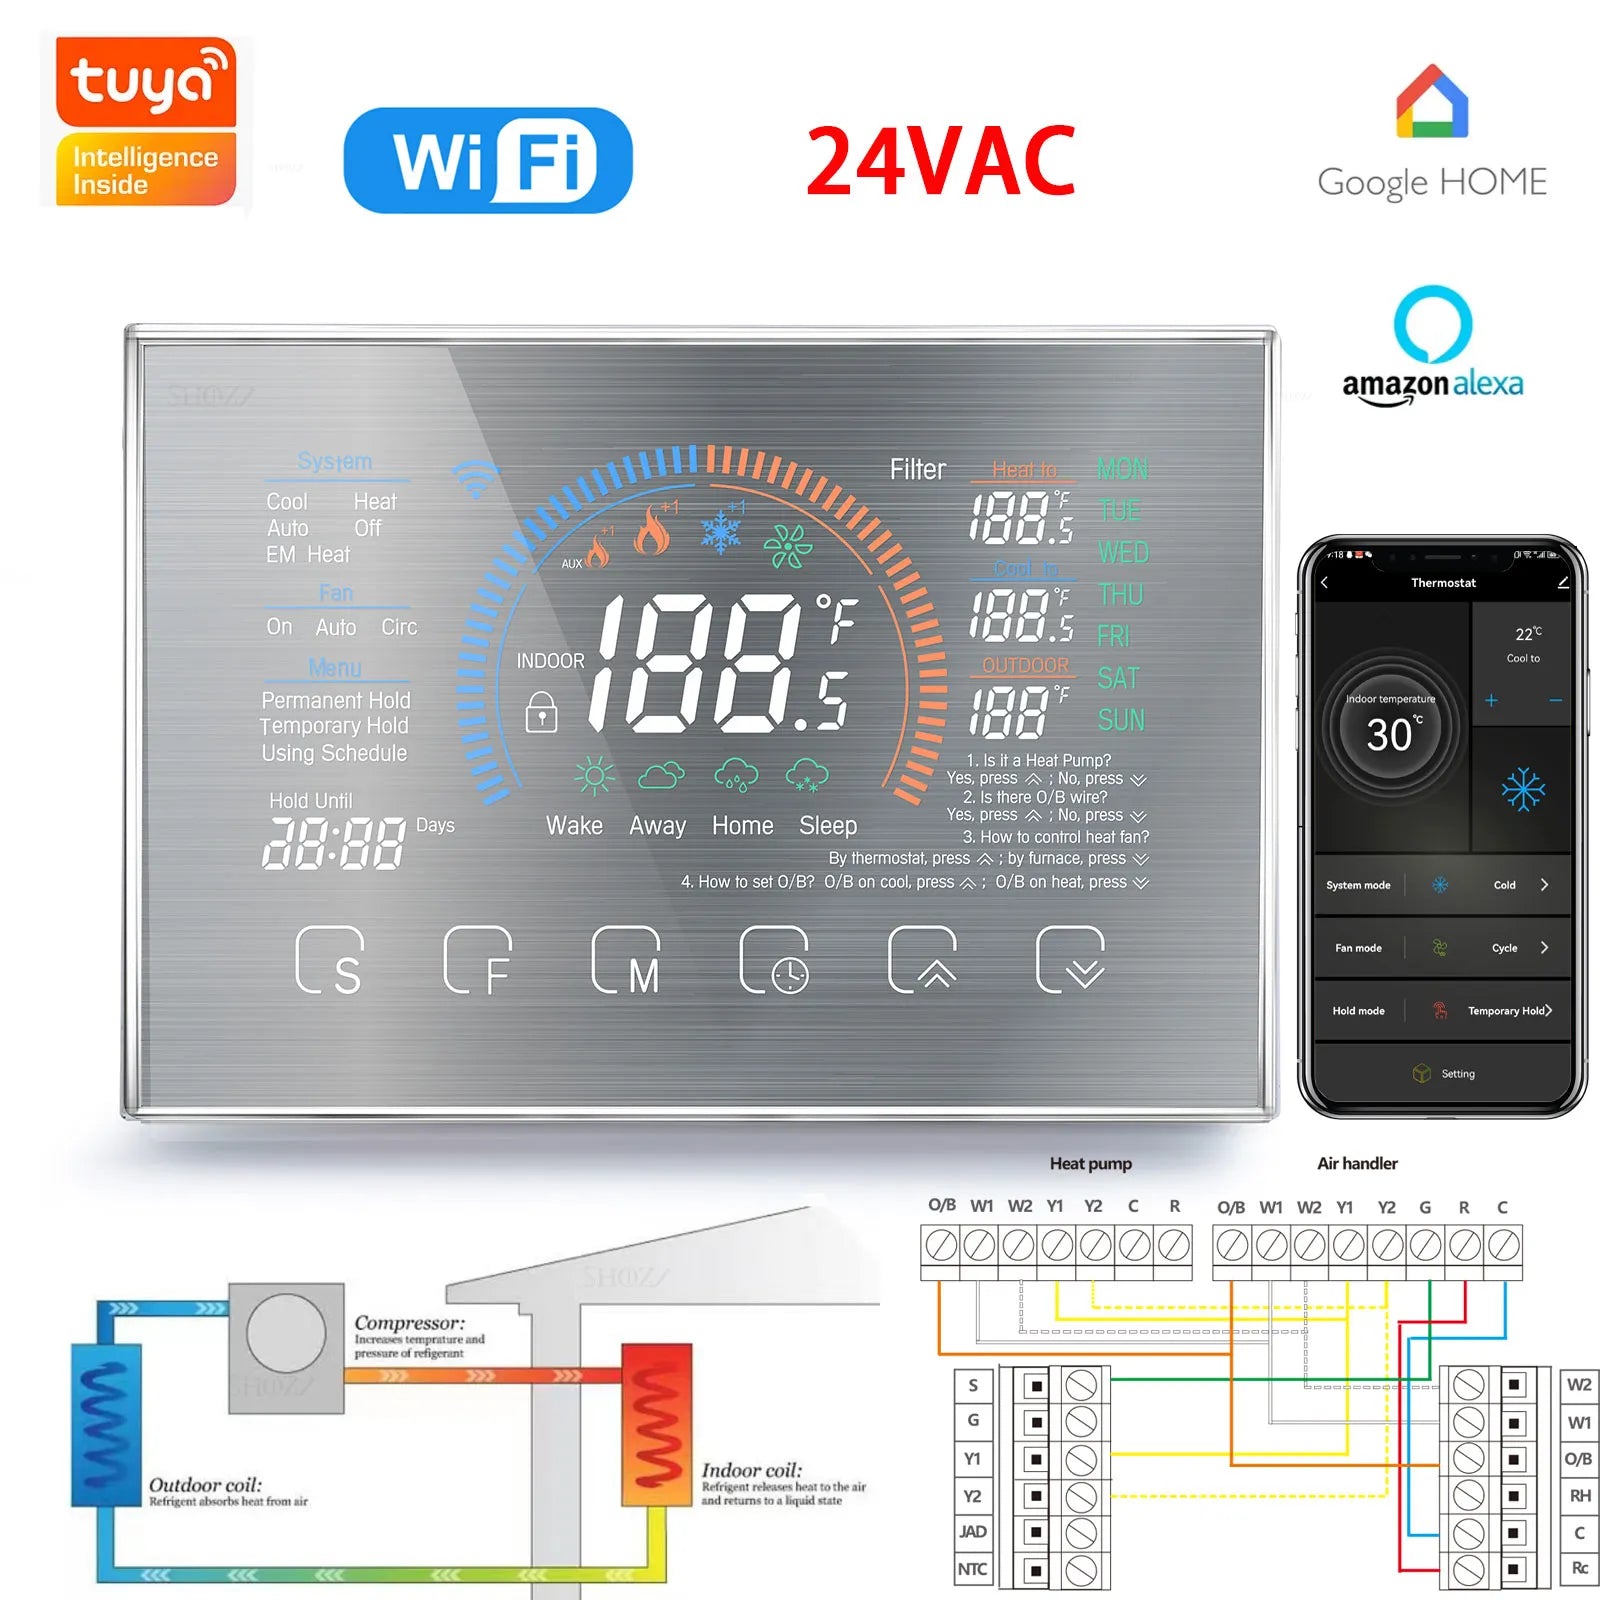 TUYA 24VAC Heat Pump WIFI Thermostat for HVAC System - Compatible with Heat Pump, Boiler, Air Energy, and Radiant Floor Heating